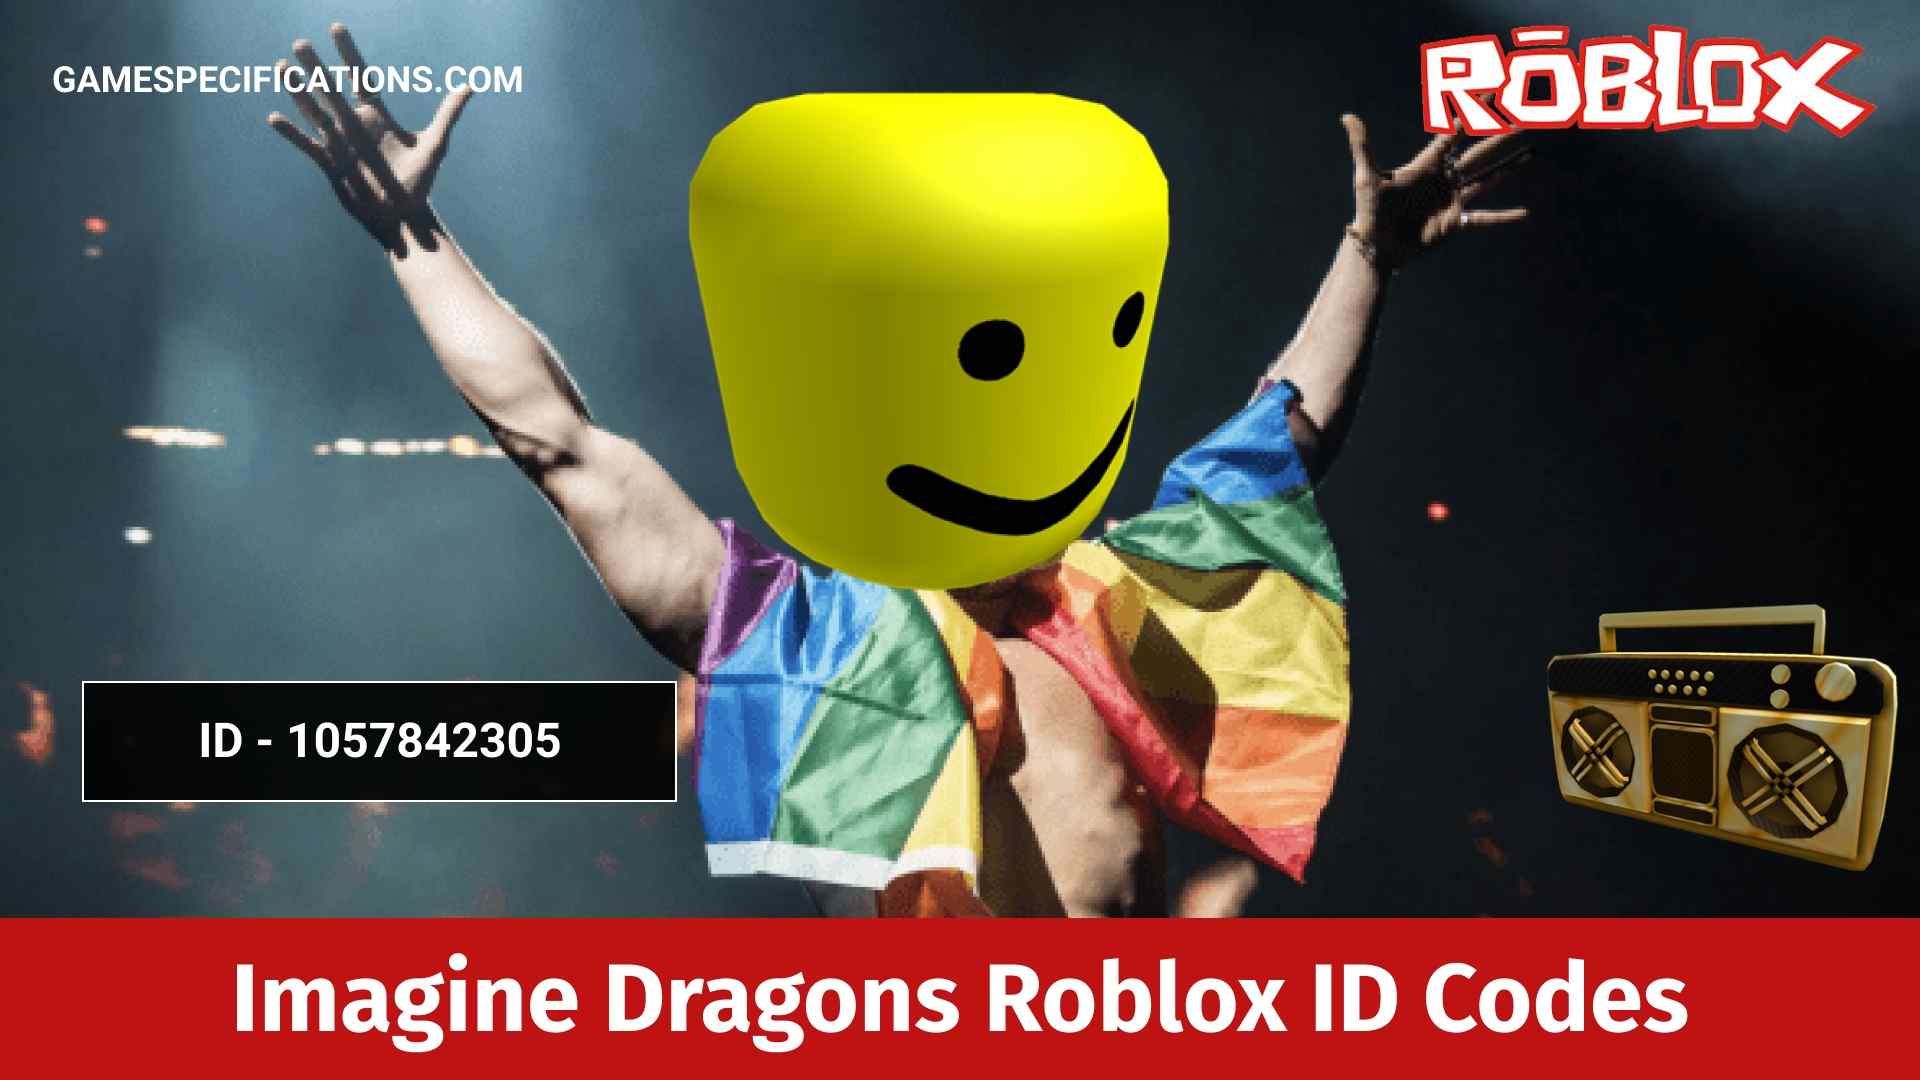 50 Imagine Dragons Roblox Id Codes 2021 Game Specifications - no problem roblox id